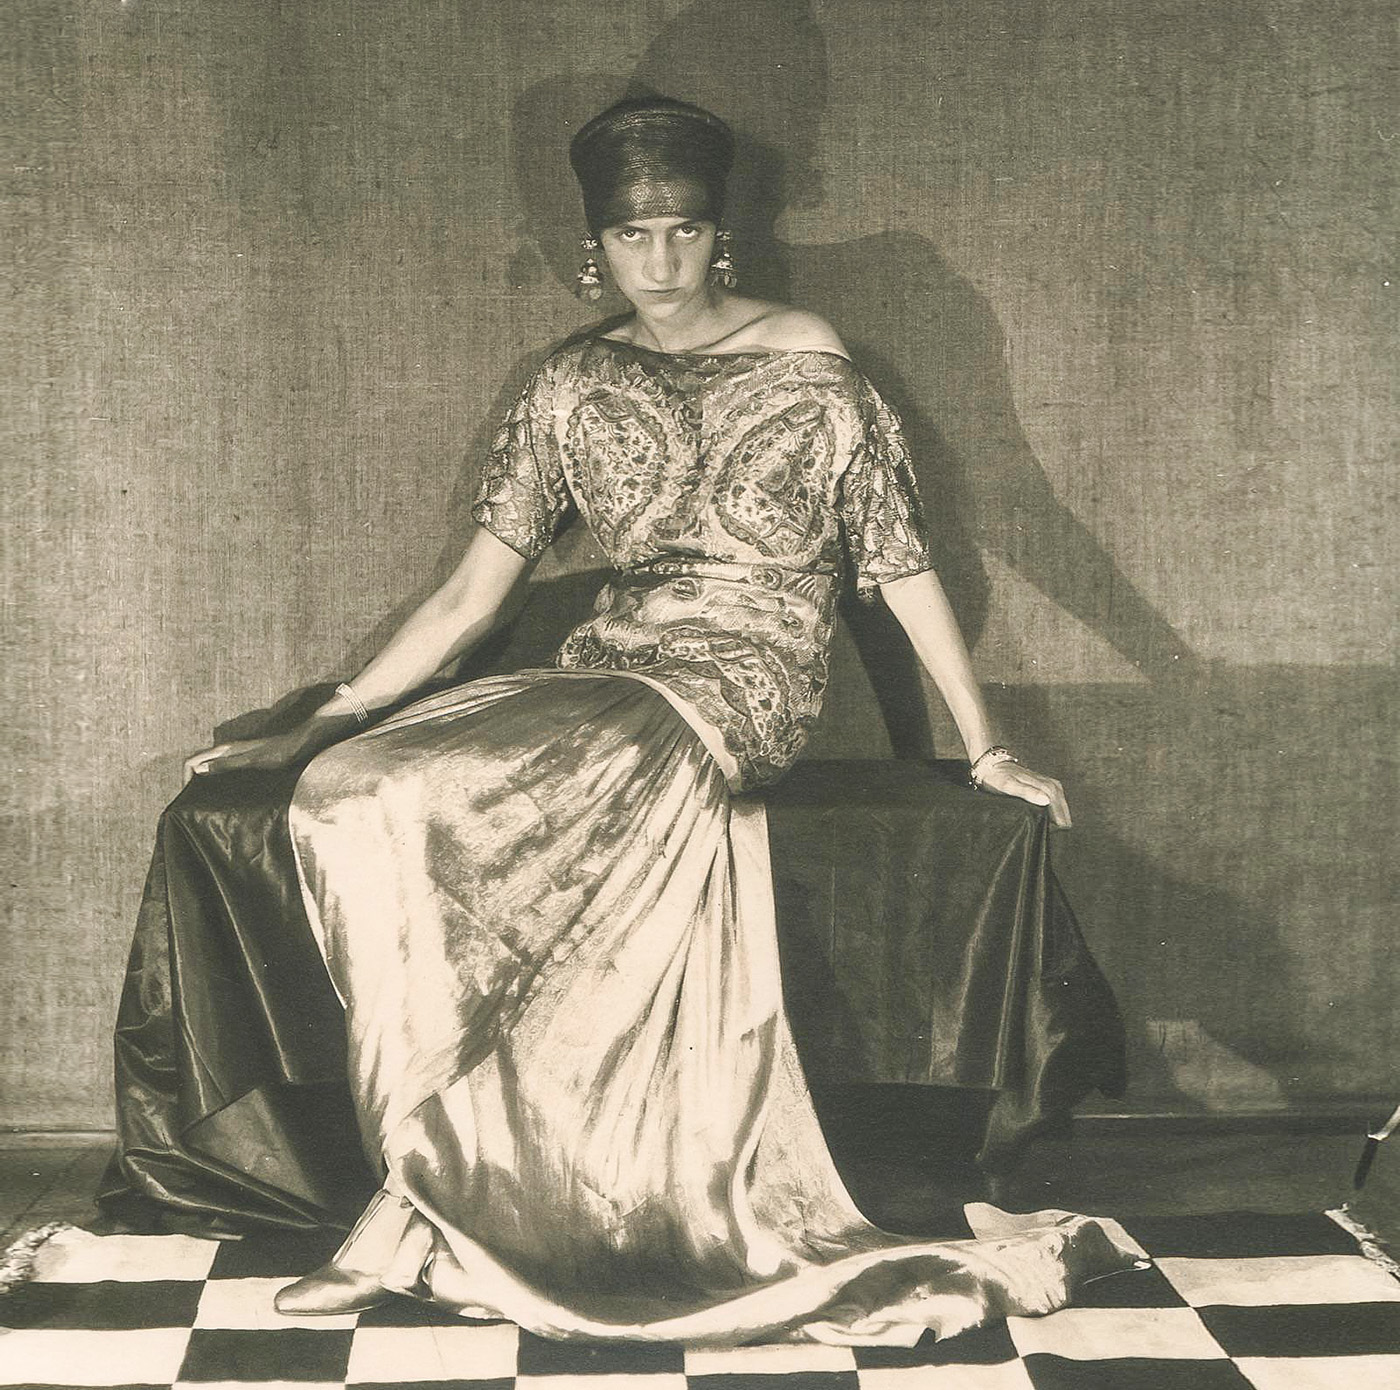 Peggy Guggenheim by Man Ray in Poiret couture